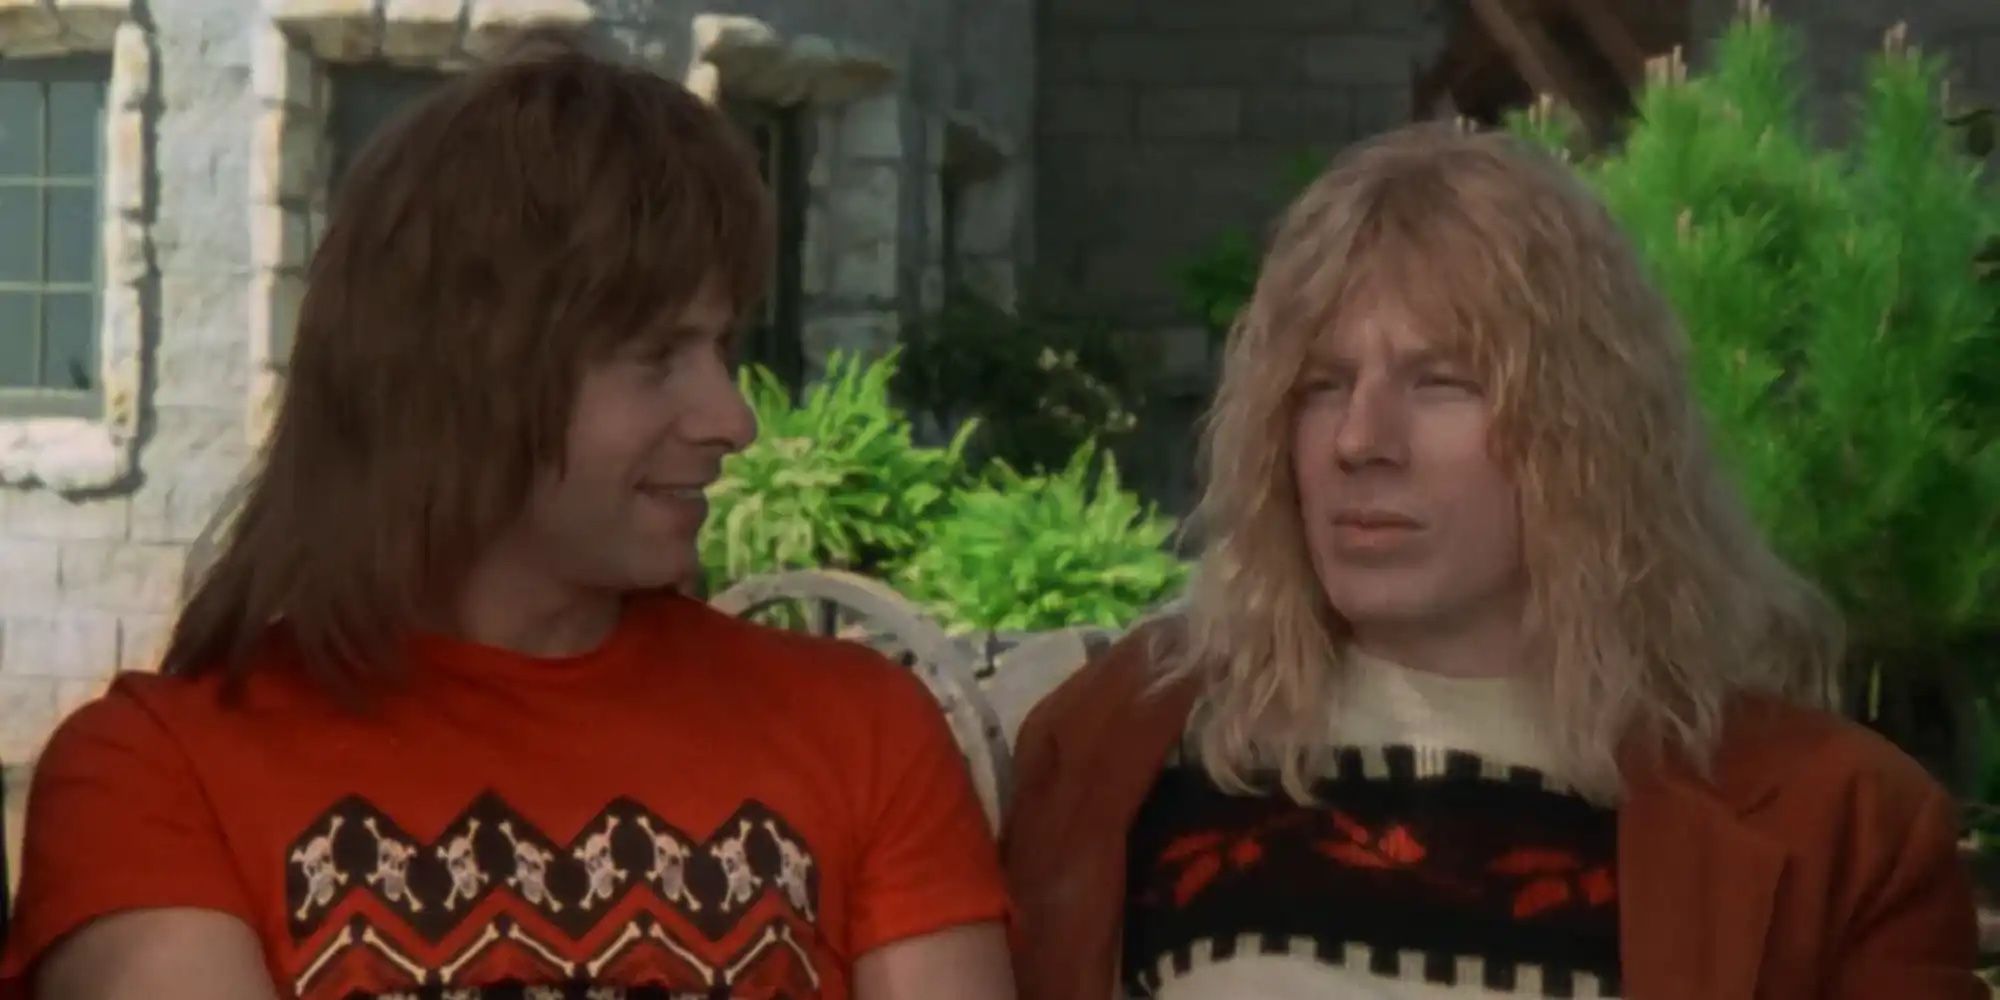 Michael McKean in This Is Spinal Tap